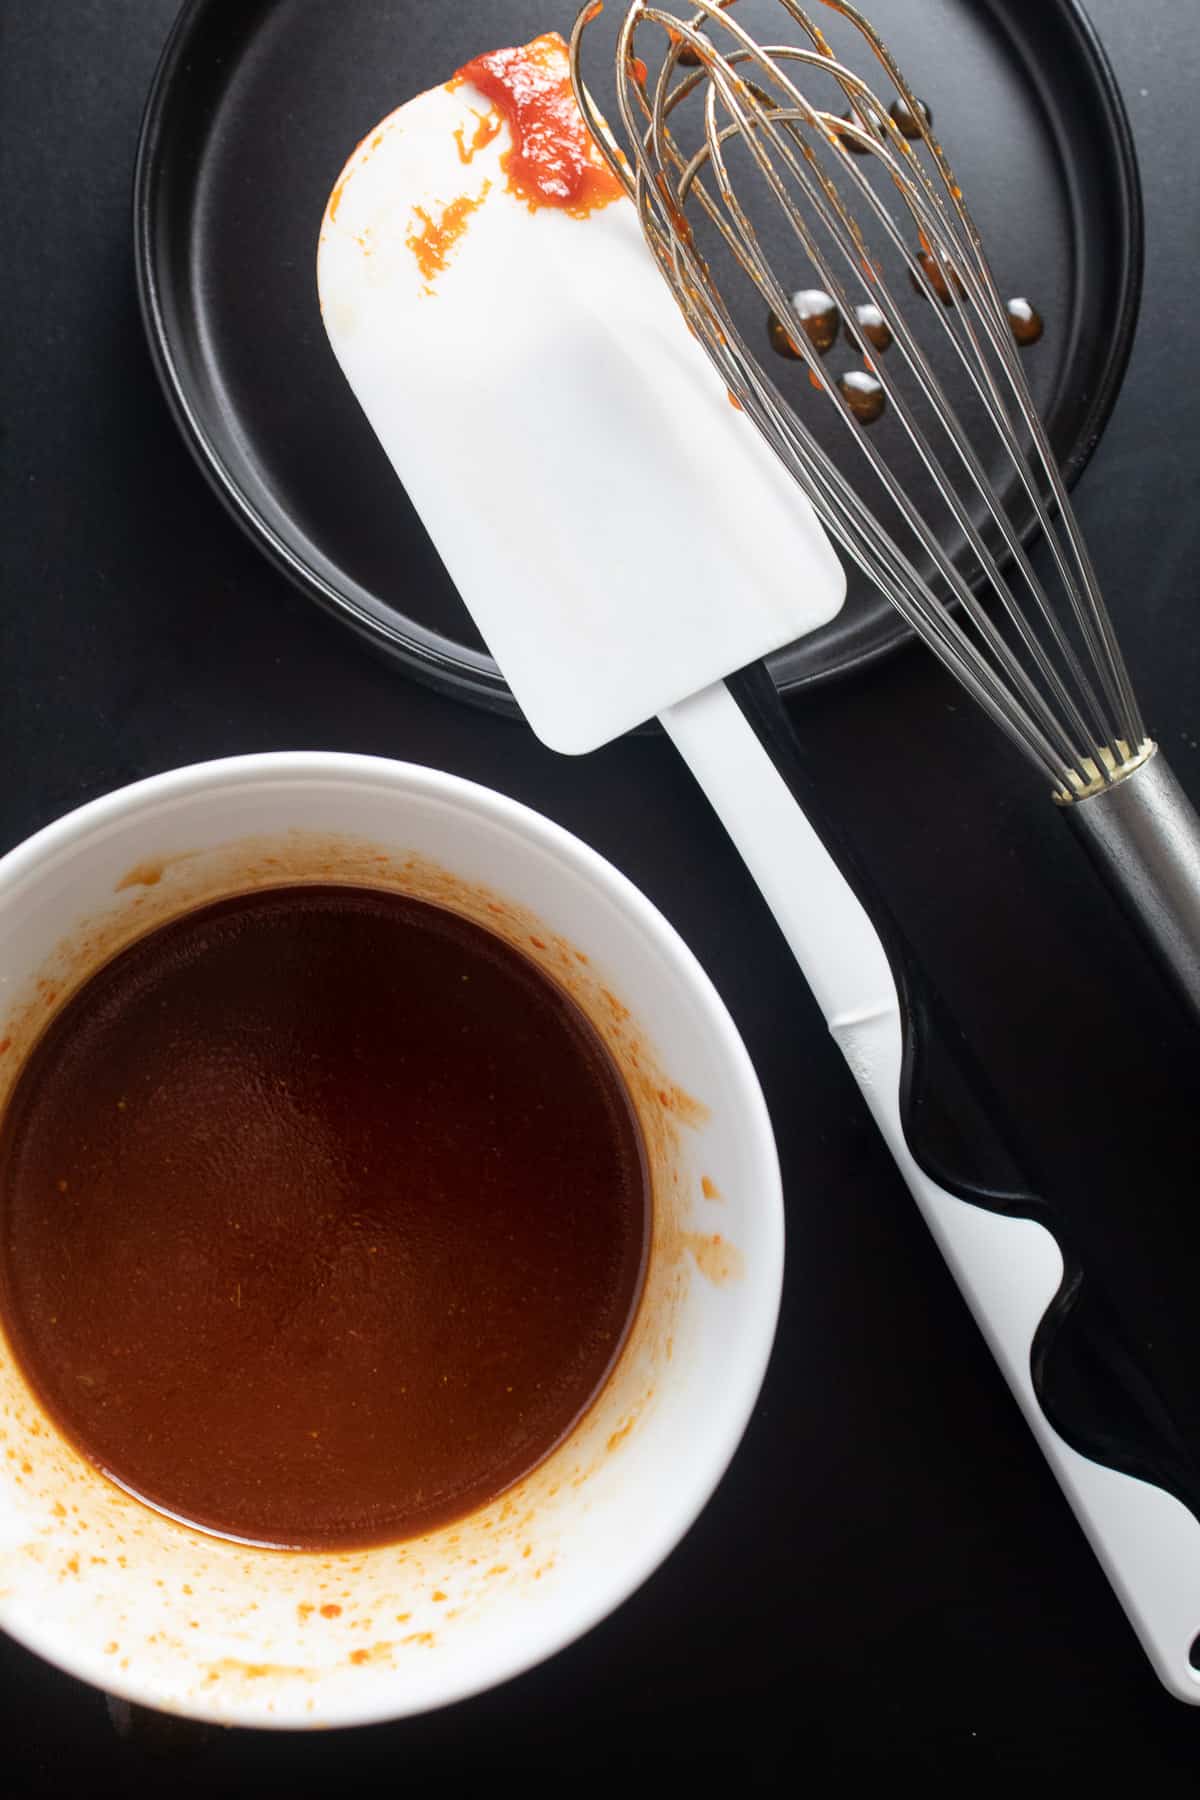 The rich red sauce is in a white bowl on a black surface with utensils nearby.